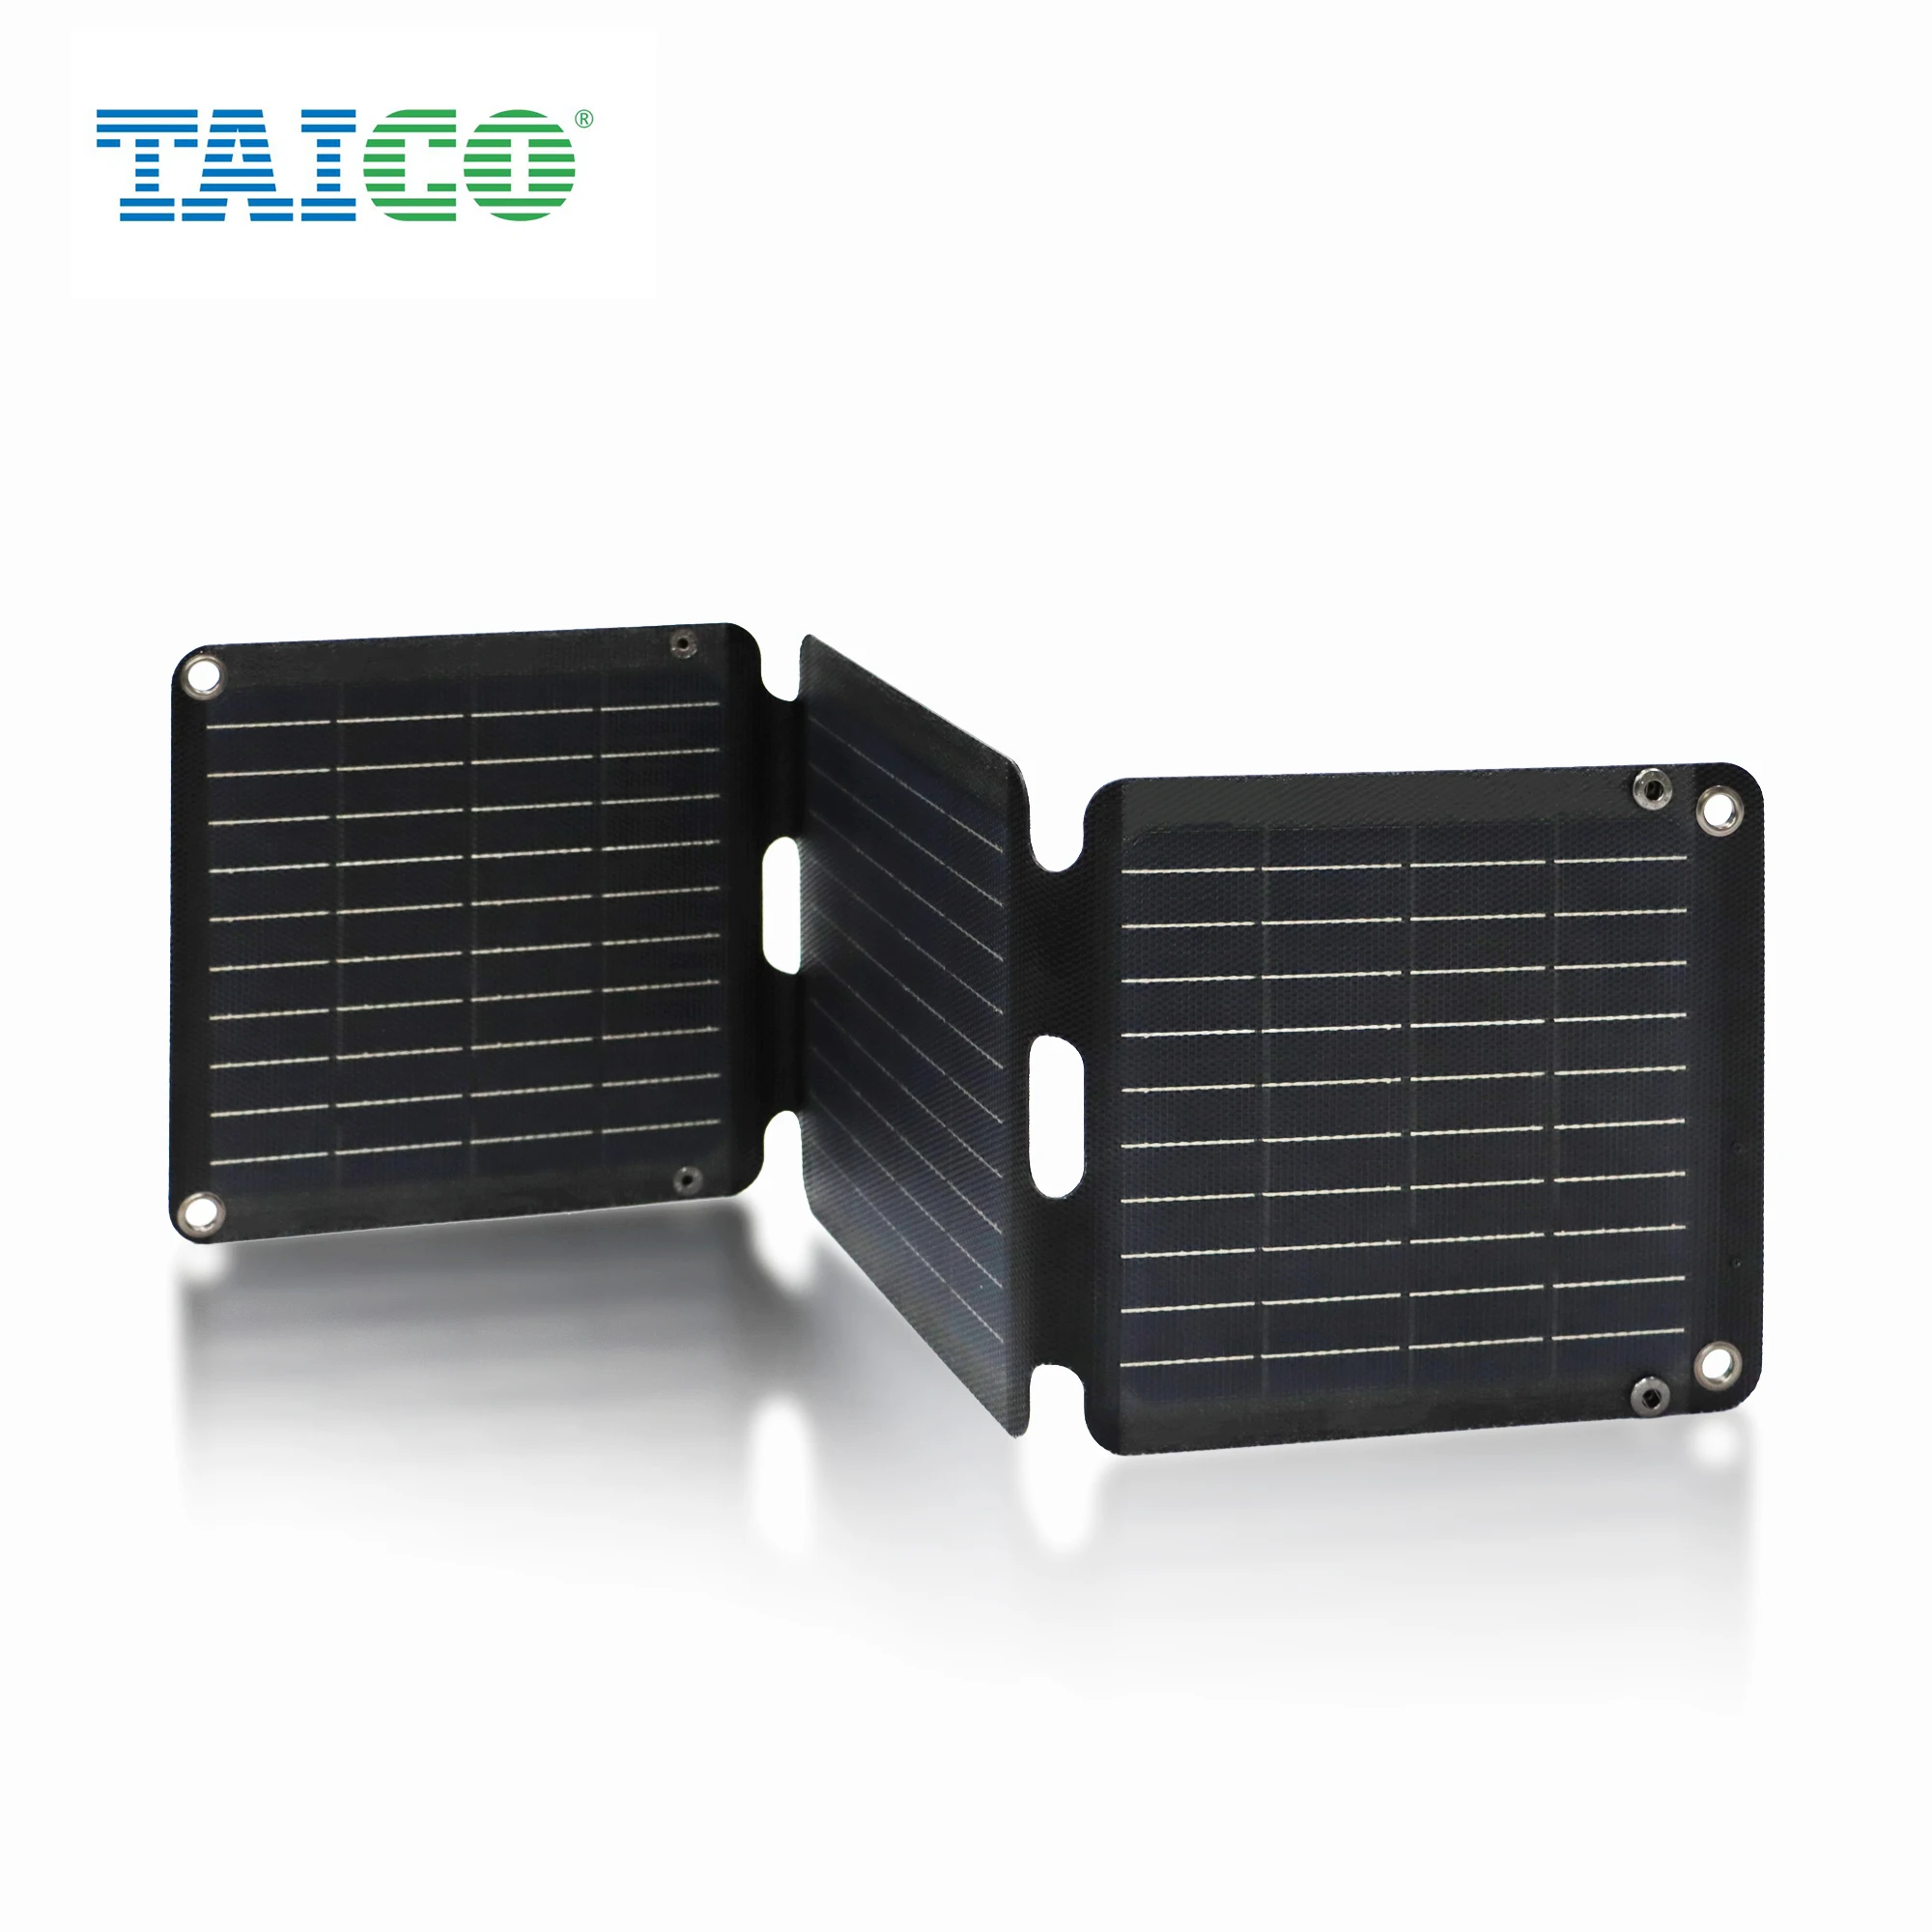 

TAICO Monocrystalline Silicon 12V Usb Charger Portable Solar Panel 21W Foldable Solar Panels With High Efficiency